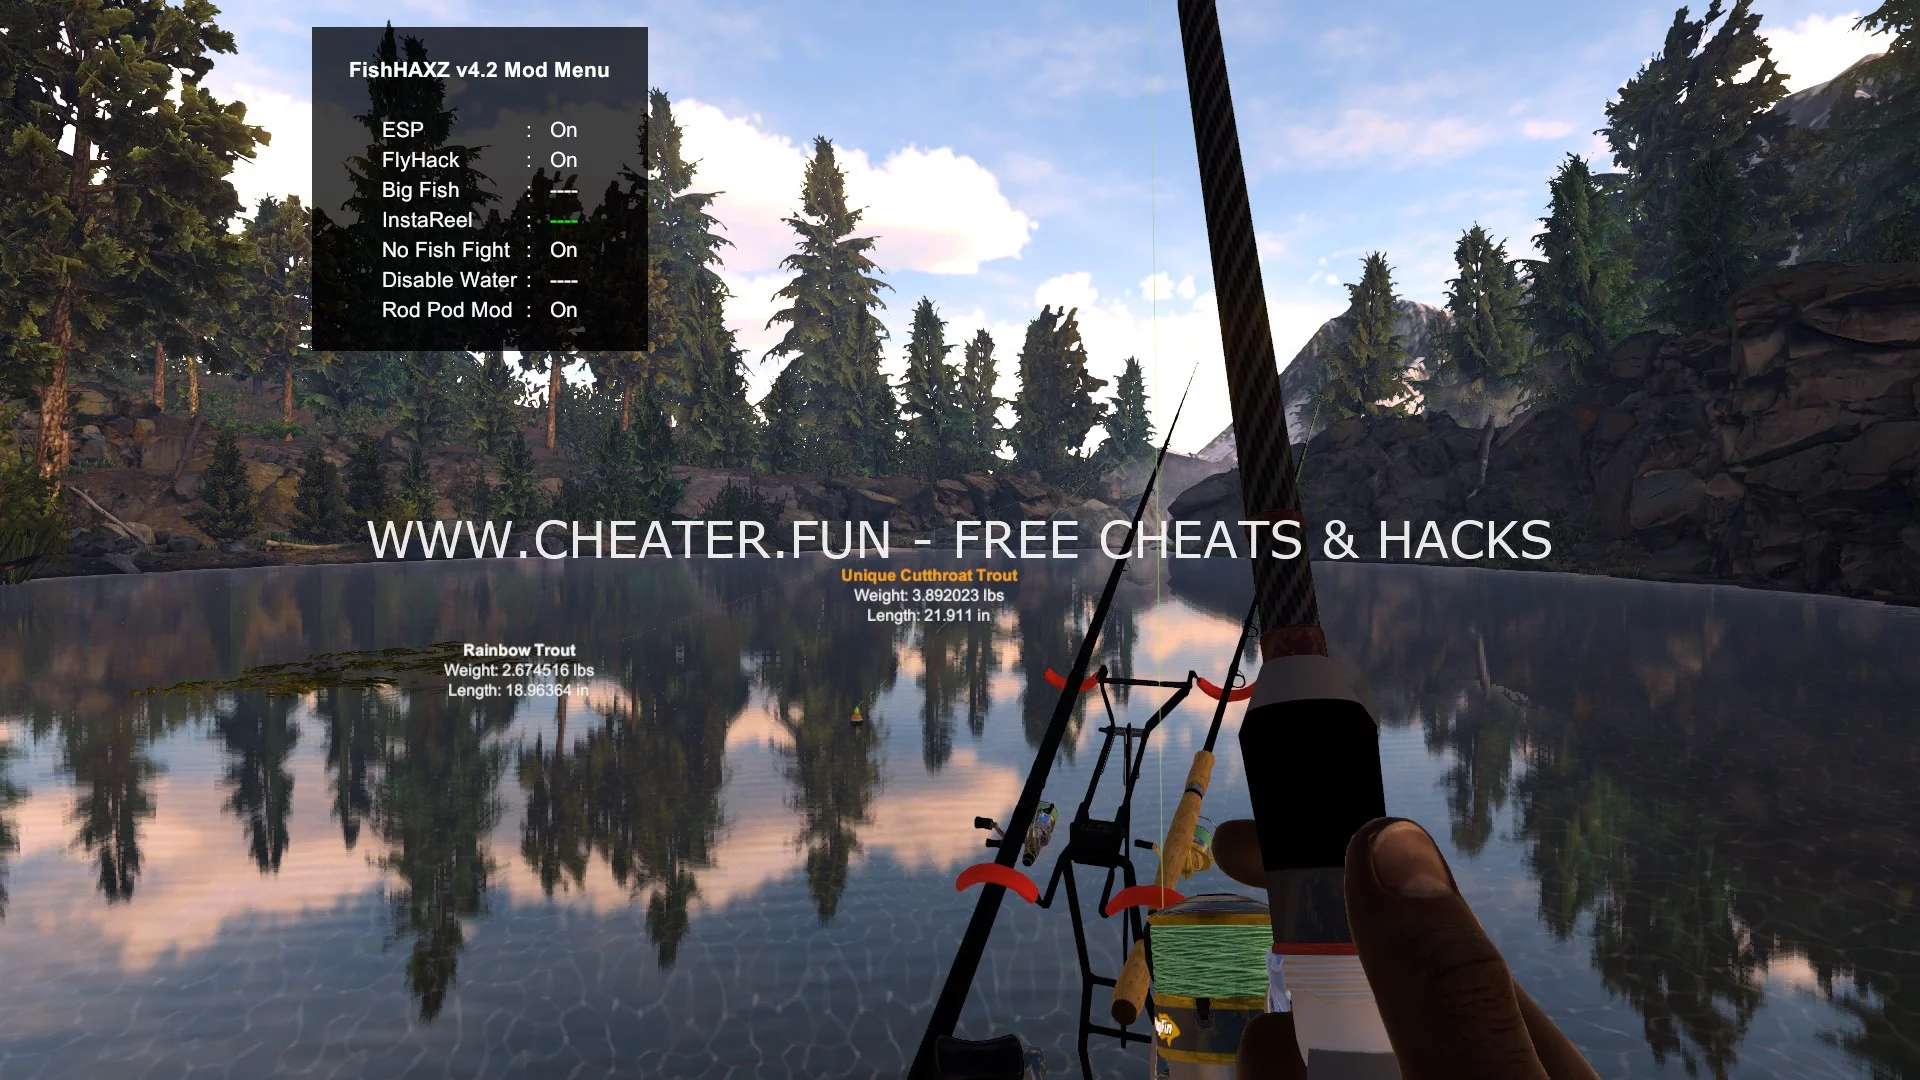 Cheat for Fishing Planet - Flyhack, NoClip, ESP and More